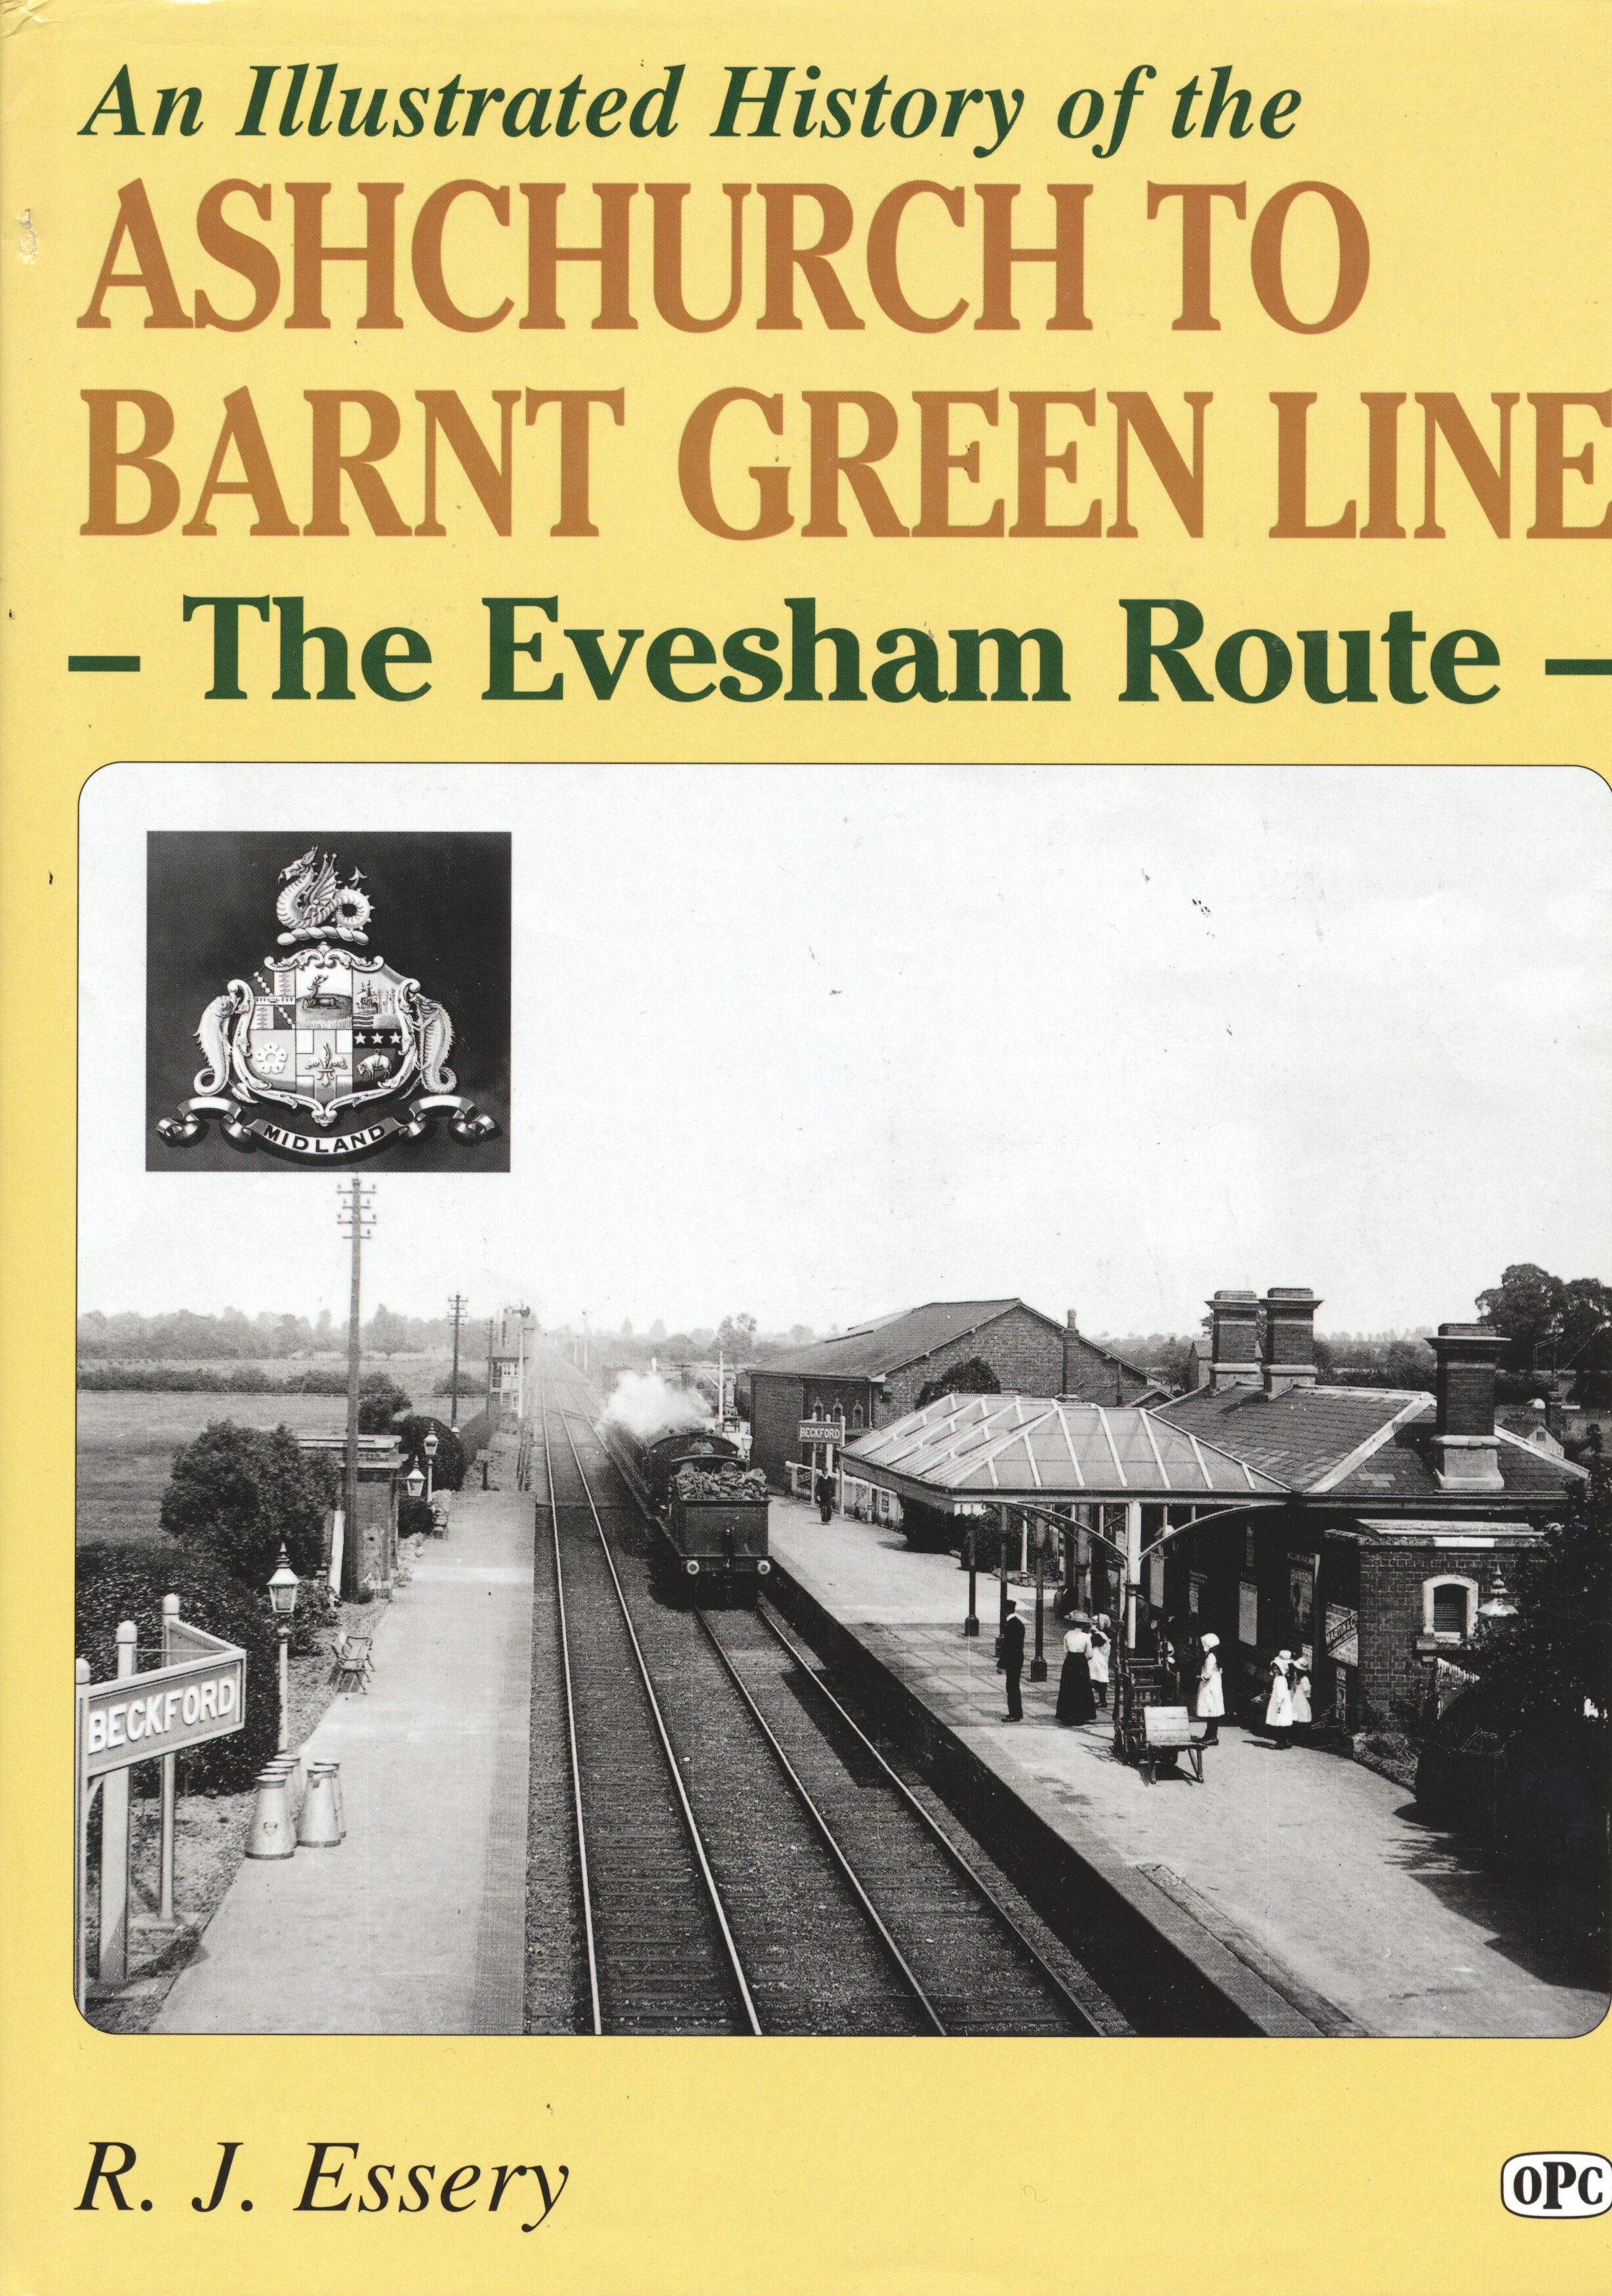 Ashchurch to Barnt Green Line - The Evesham Route - R J Essery